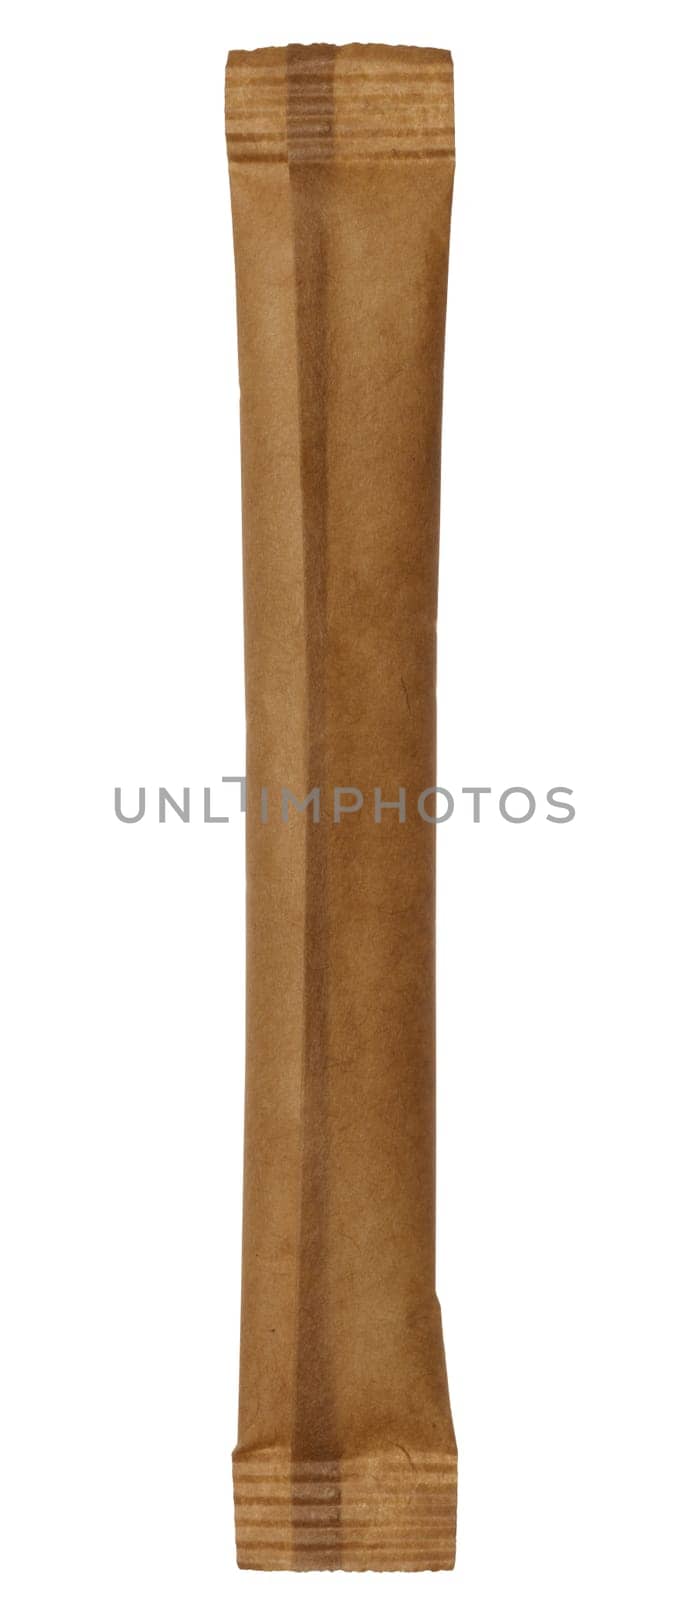 Brown paper sachet for bulk products, bulk medicines on an isolated background by ndanko